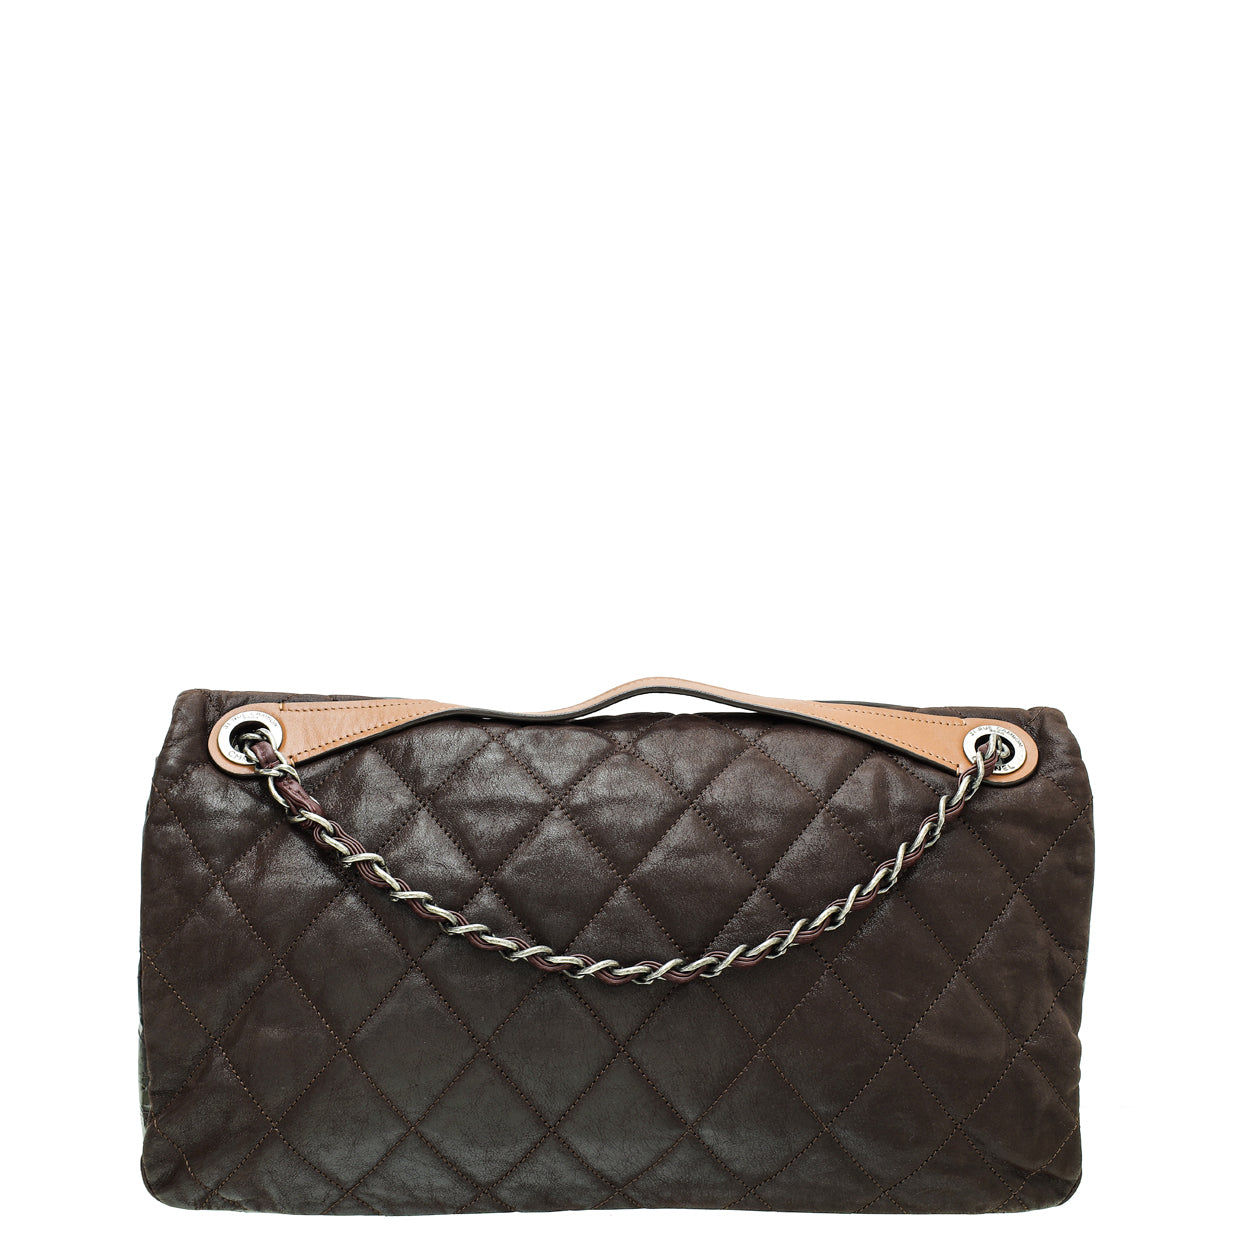 Chanel Dark Brown "In the Mix" Flap Large Bag